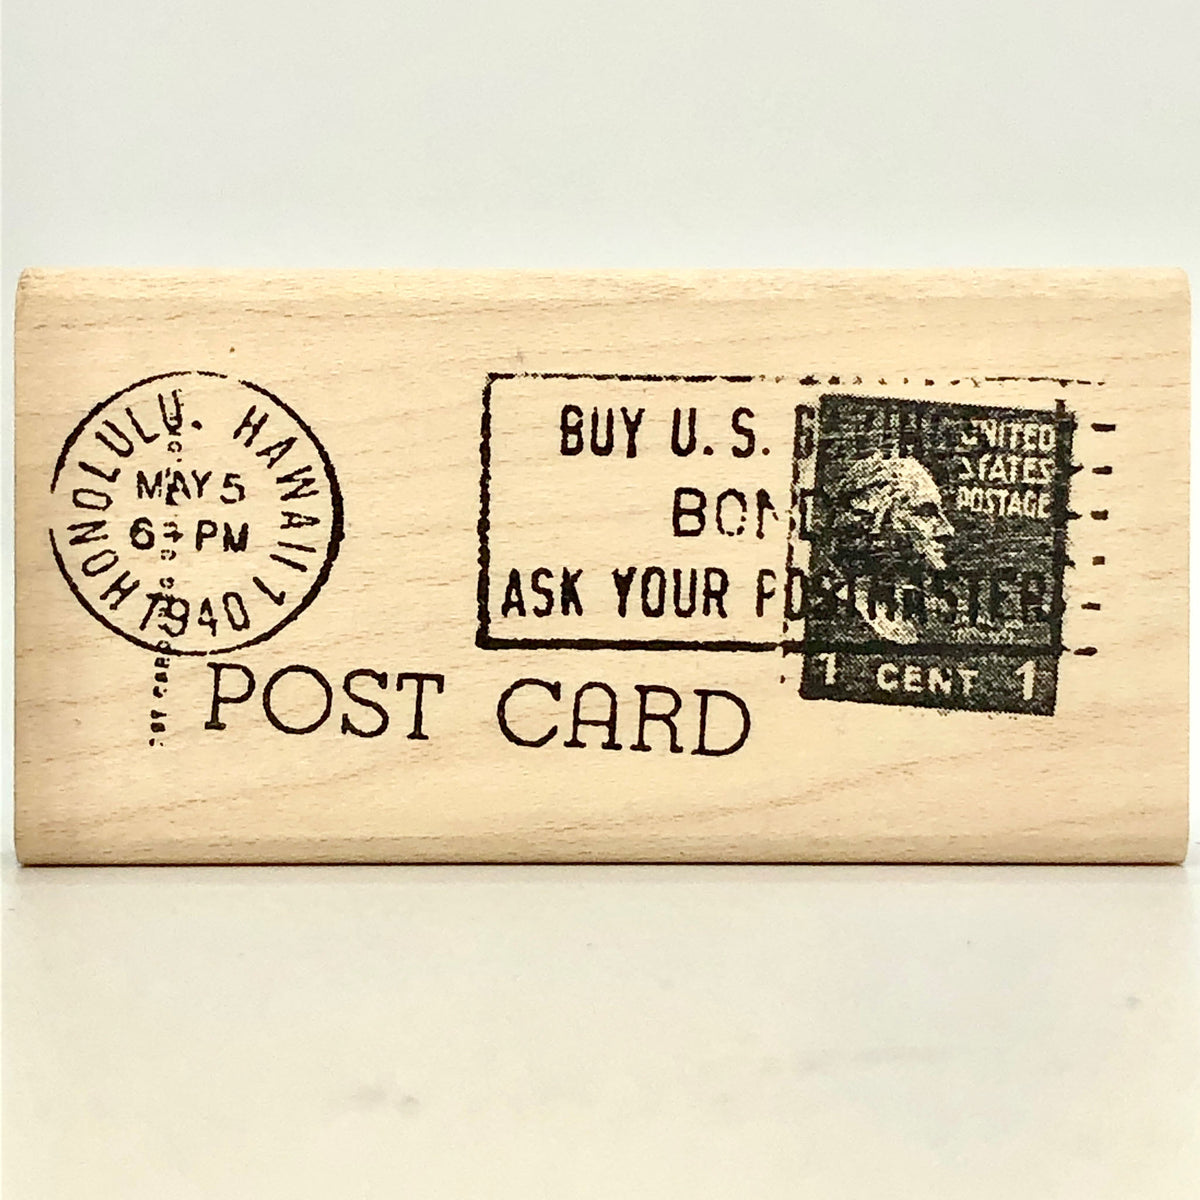 Postcard Stamps (100) - Please only order them with postcard kits